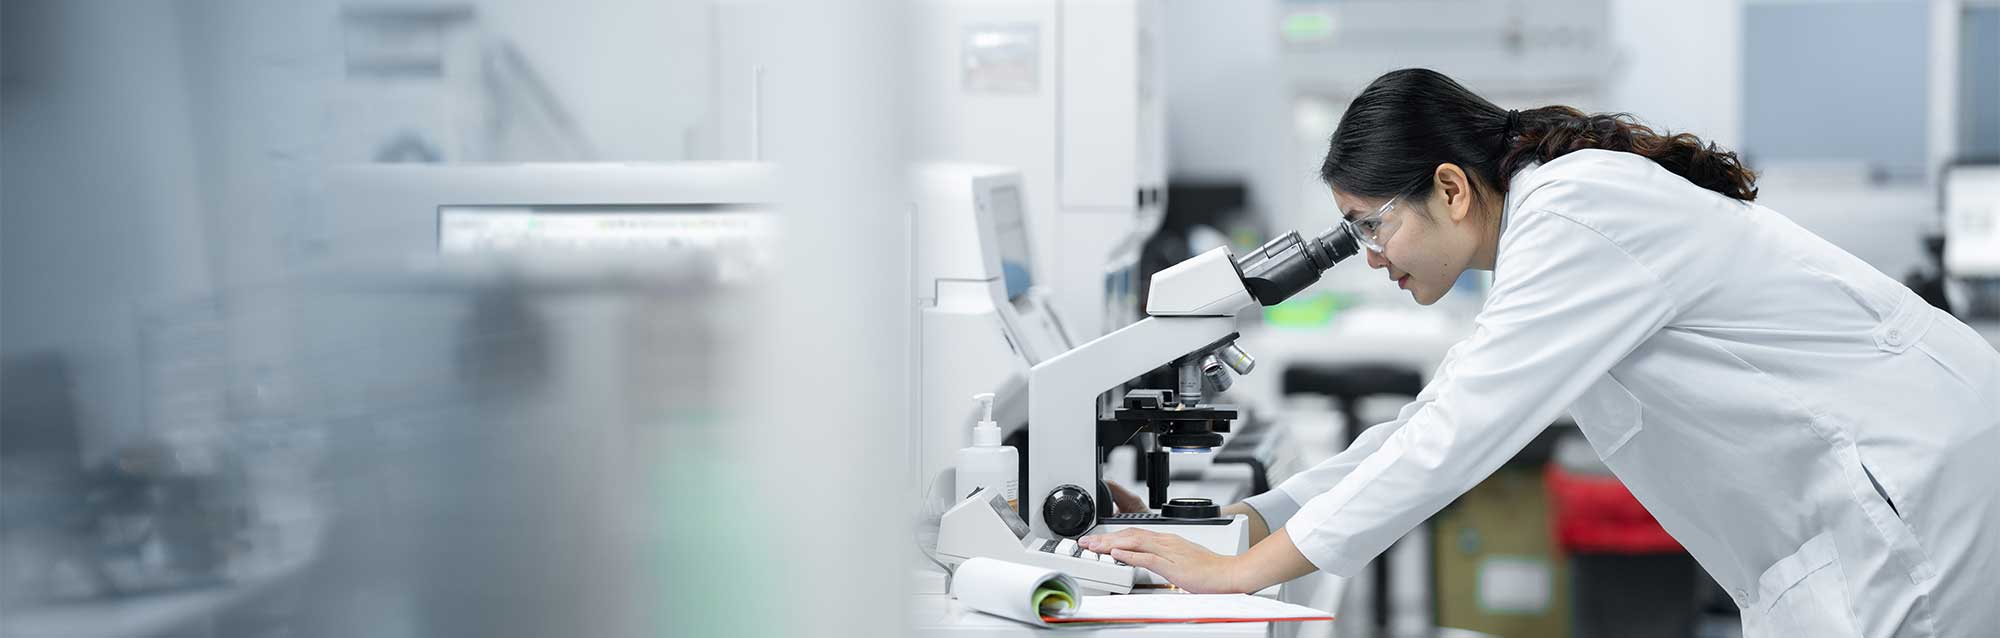 Lady in lab coat looking through microscope and using lab equipment